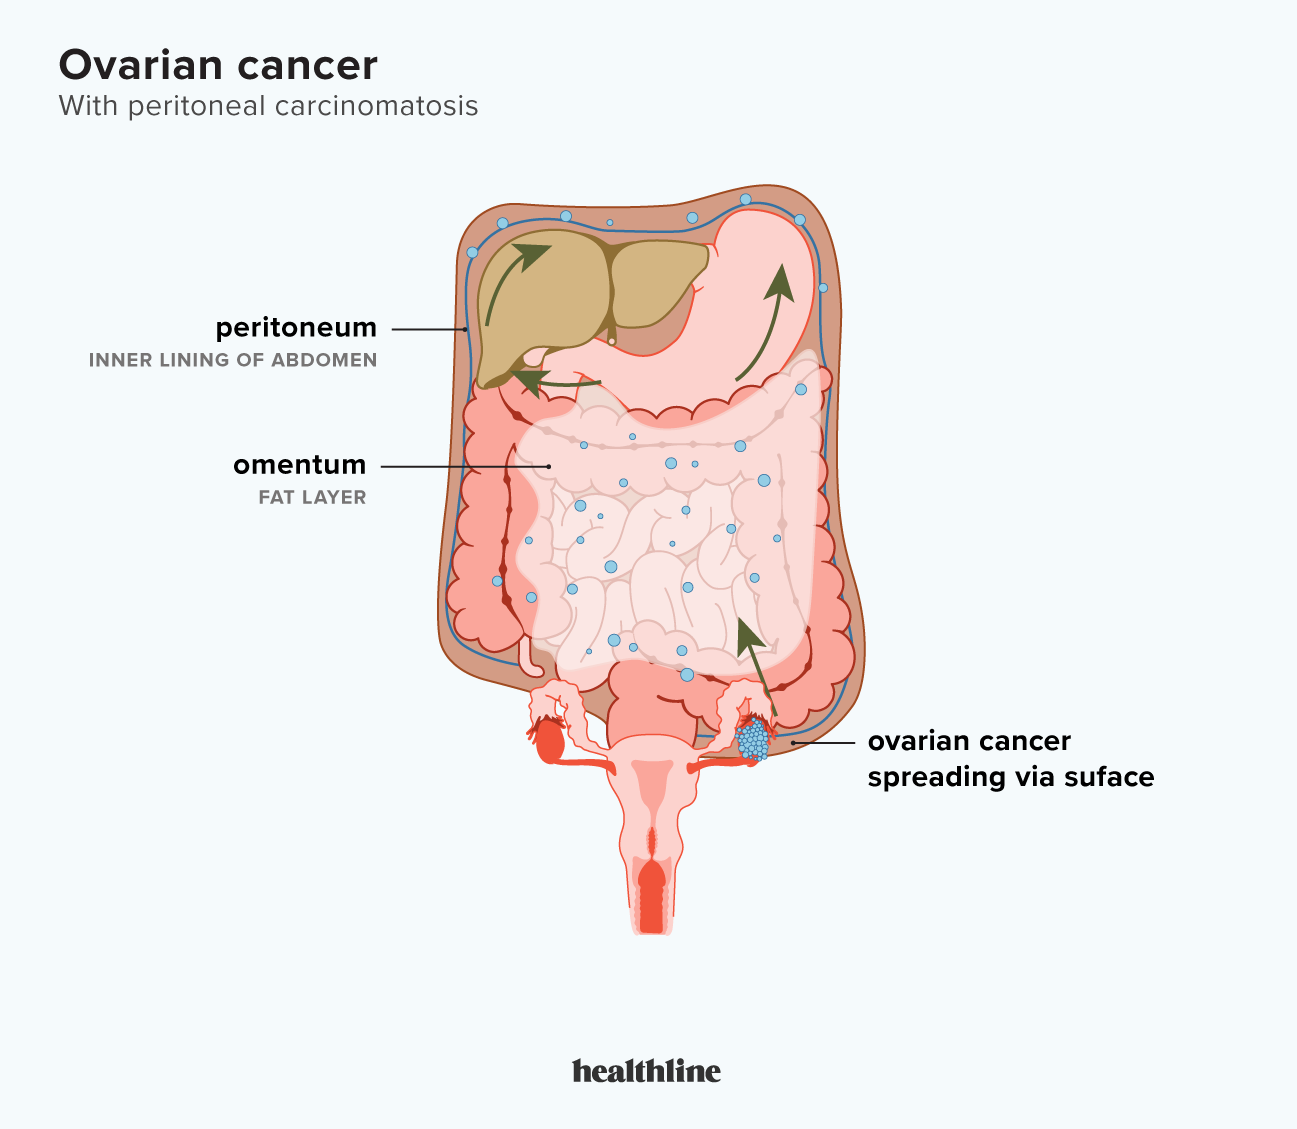 Peritoneal carcinomatosis: What is the link with ovarian cancer?